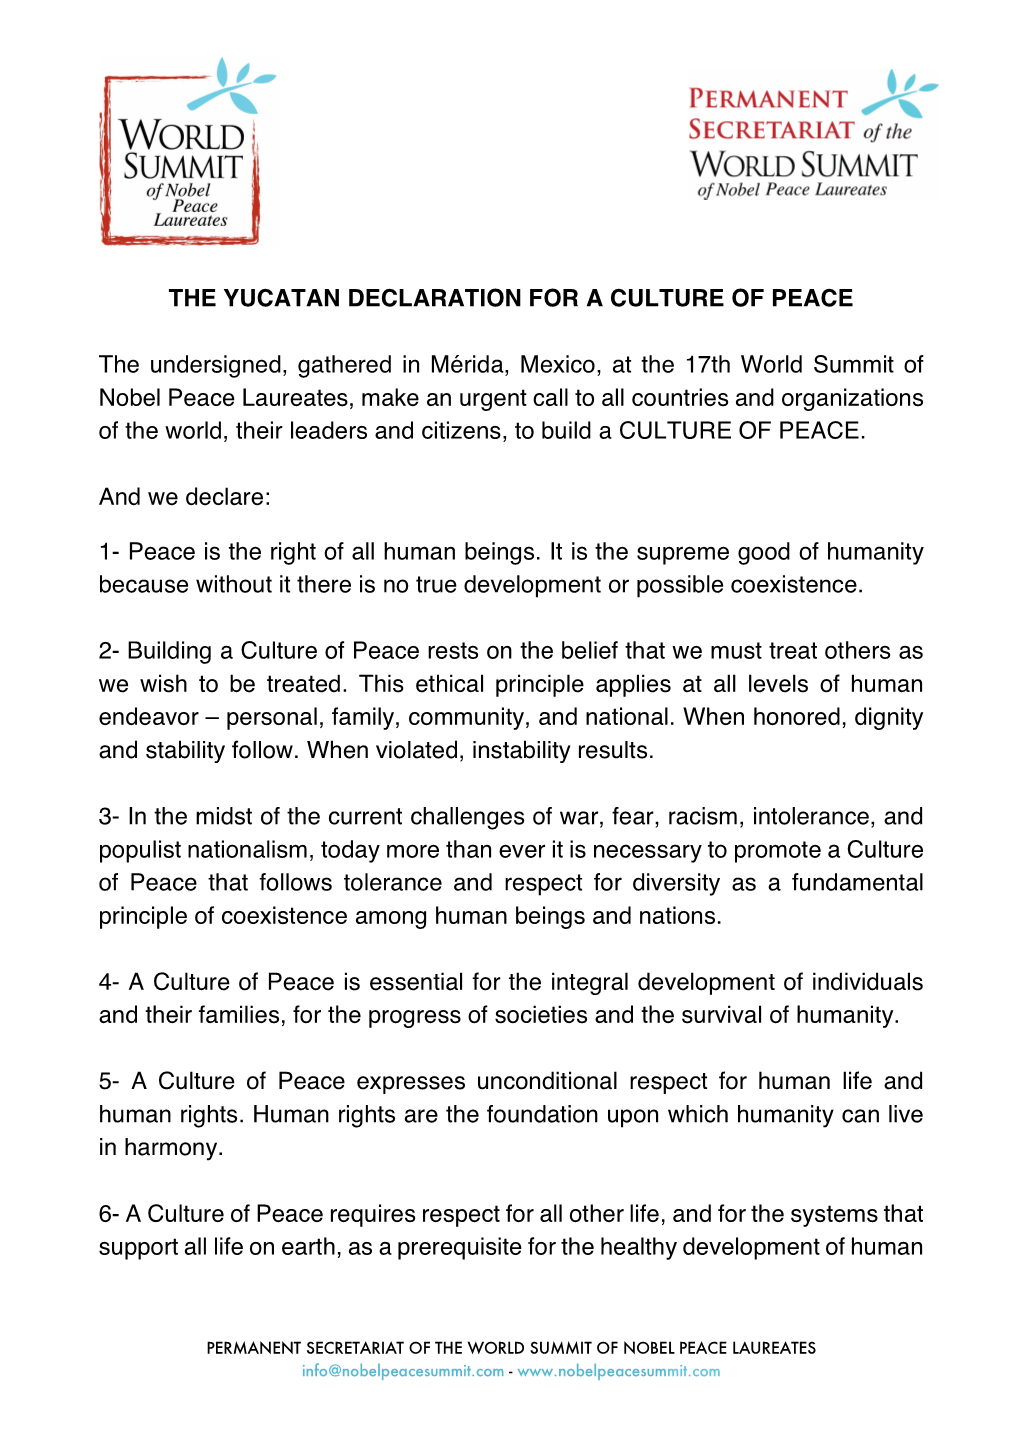 The Yucatan Declaration for a Culture of Peace